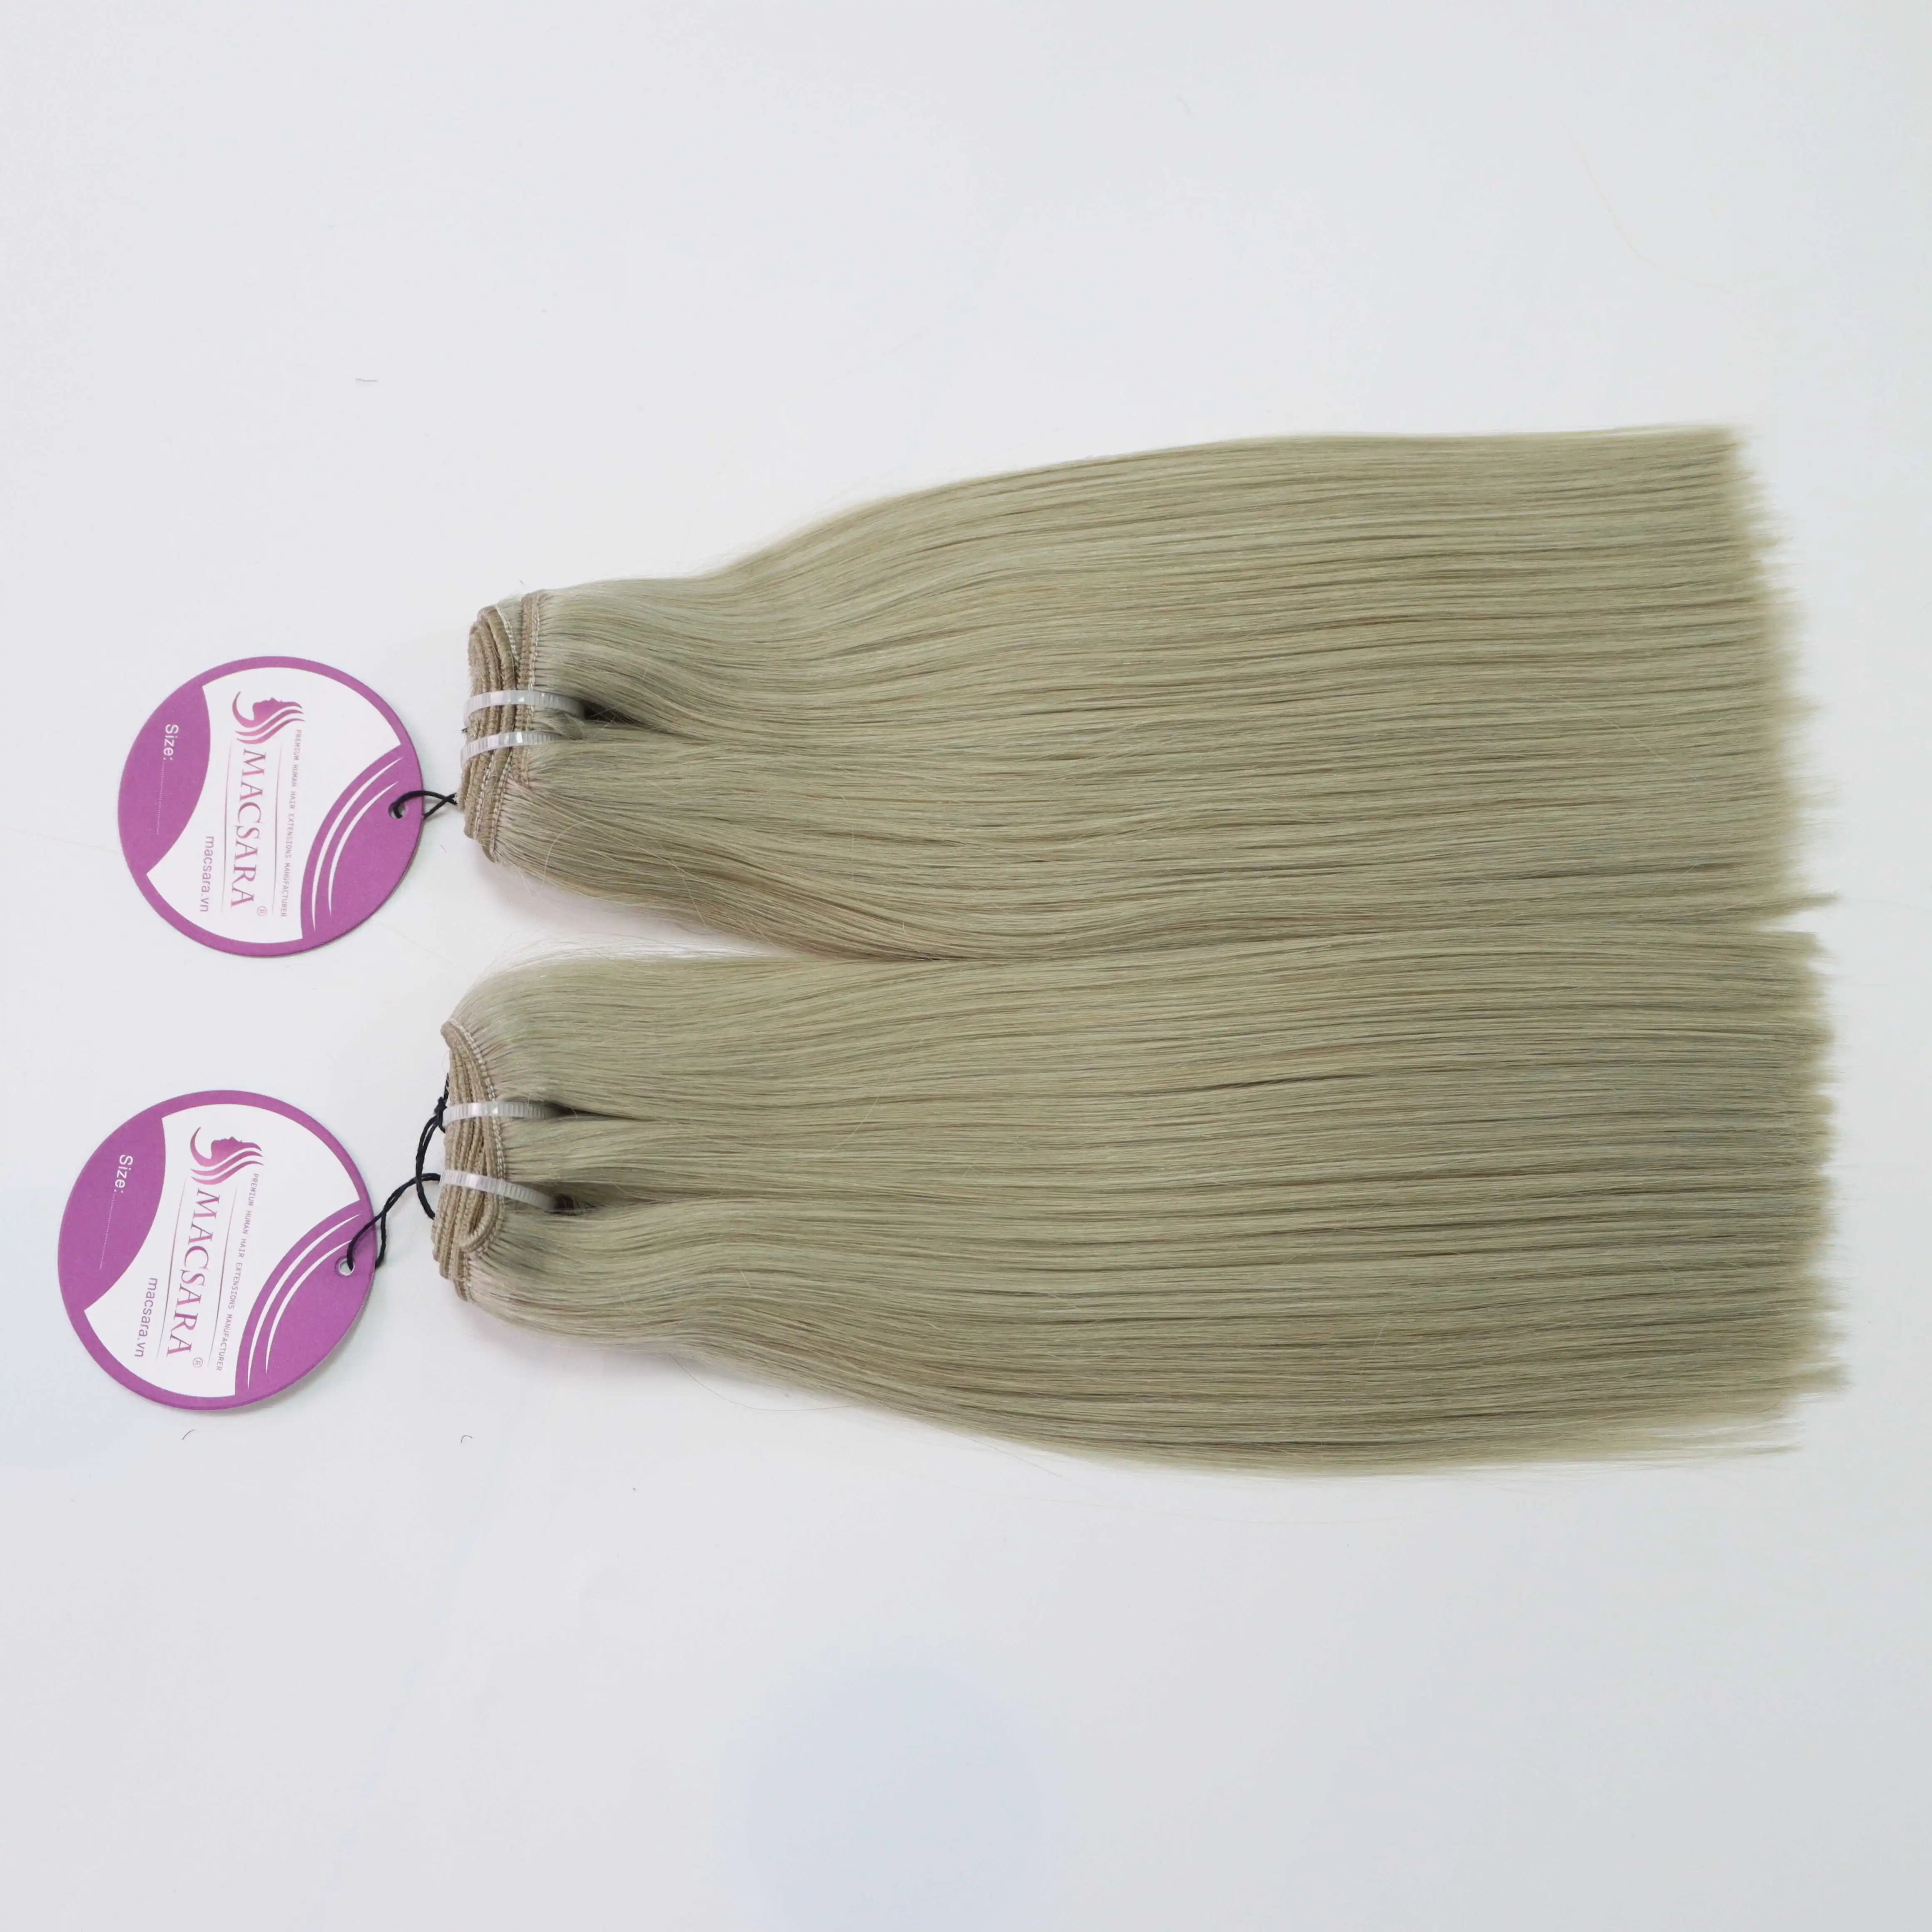 Wholesale High Quality Raw Vietnamese Hair Bundles Machine Weft Hair Extensions Straight Ash Color